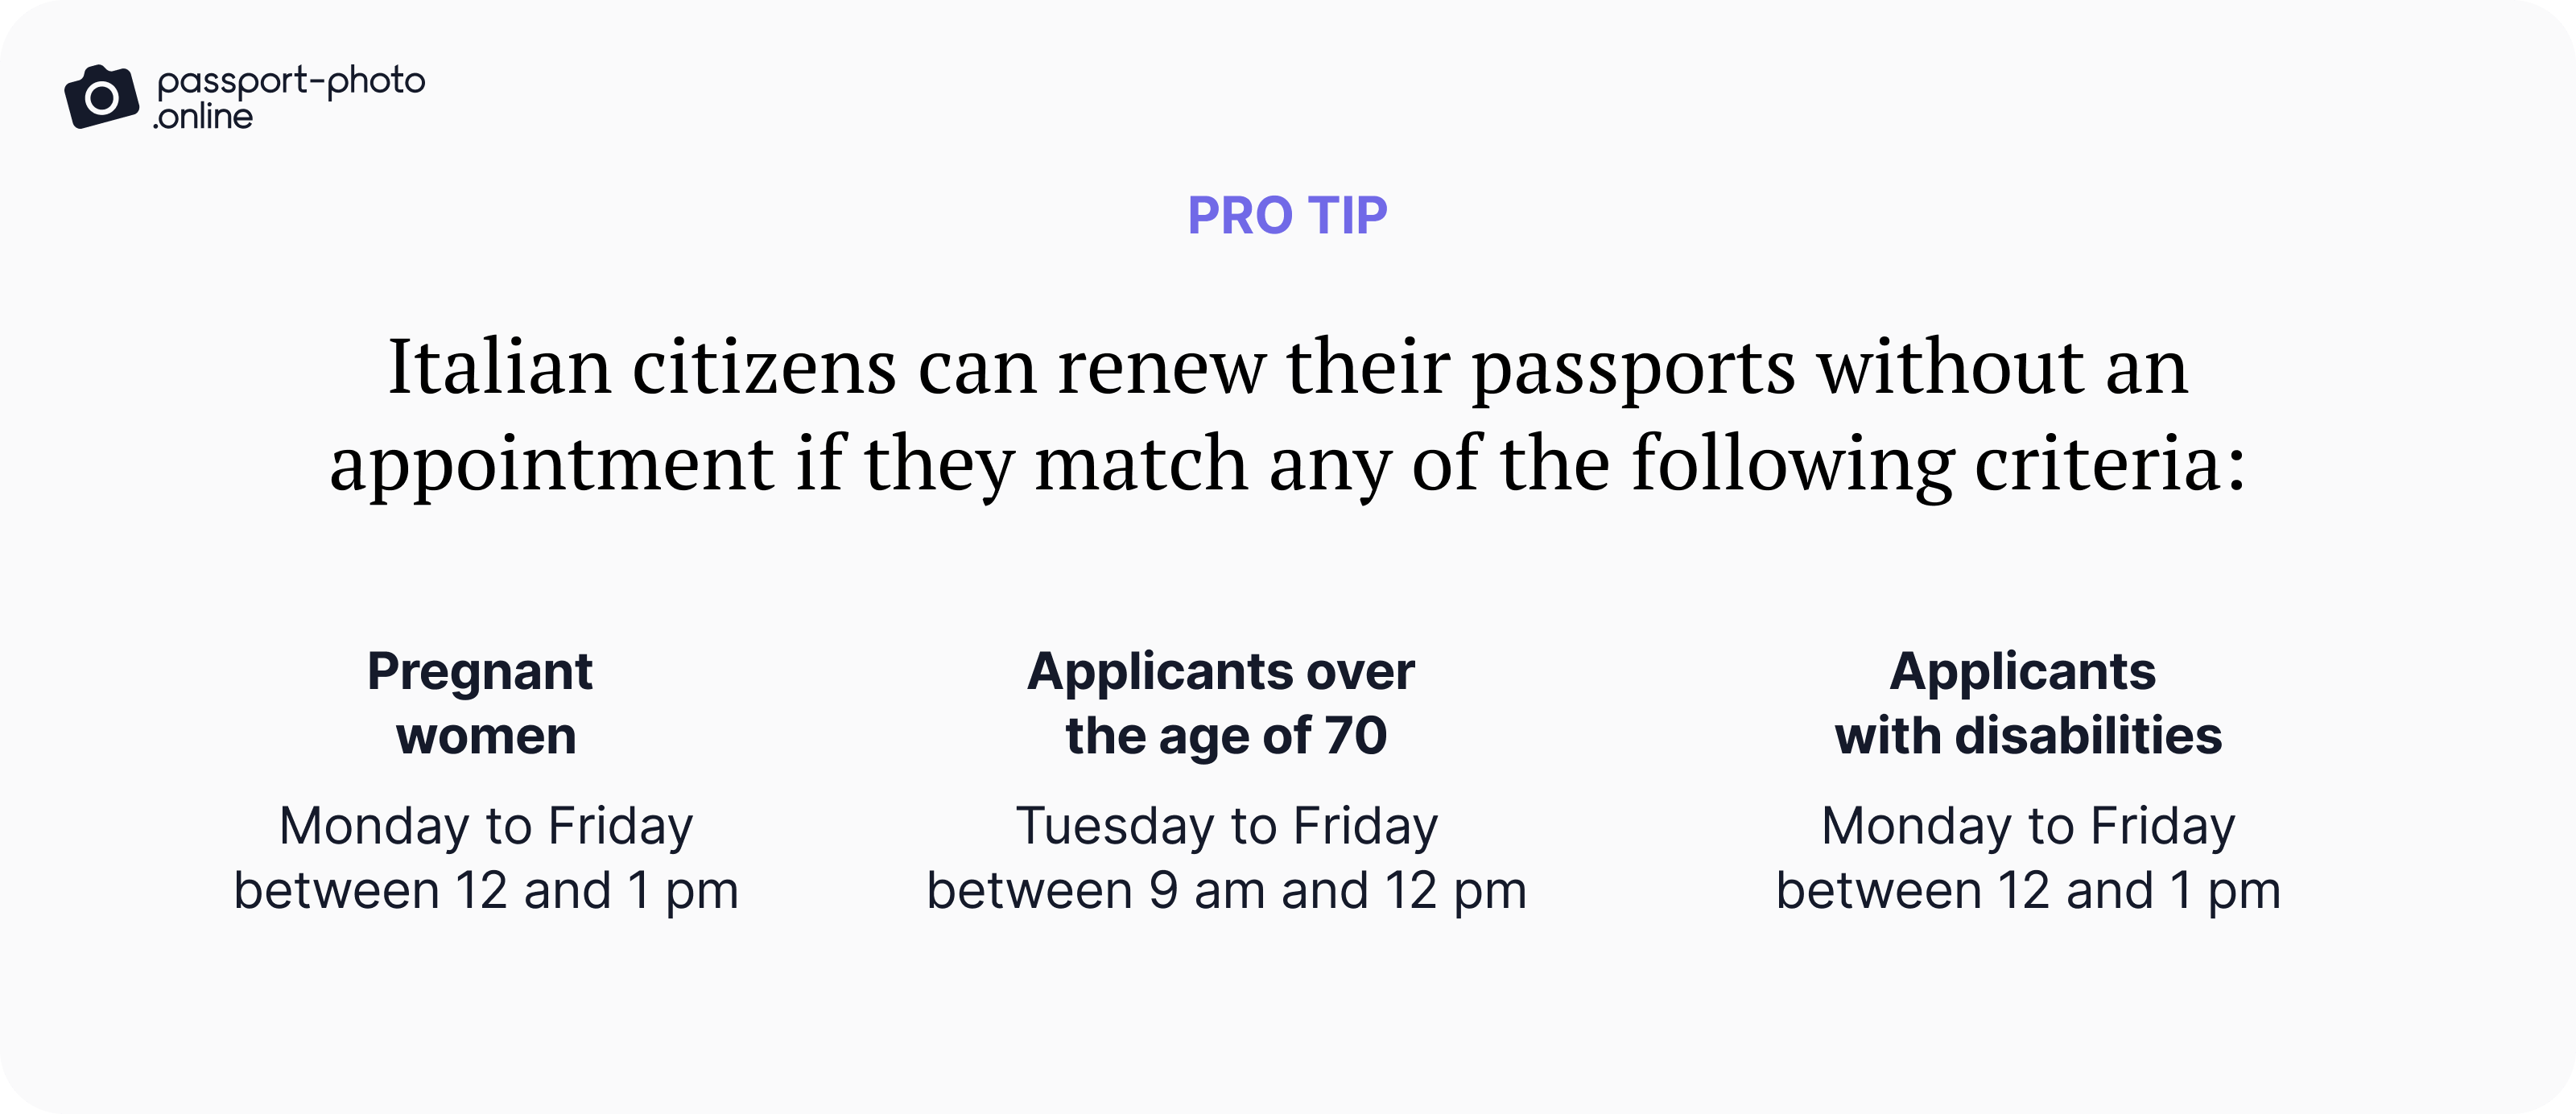 Criteria for renewing your Italian passport without making an appointment.